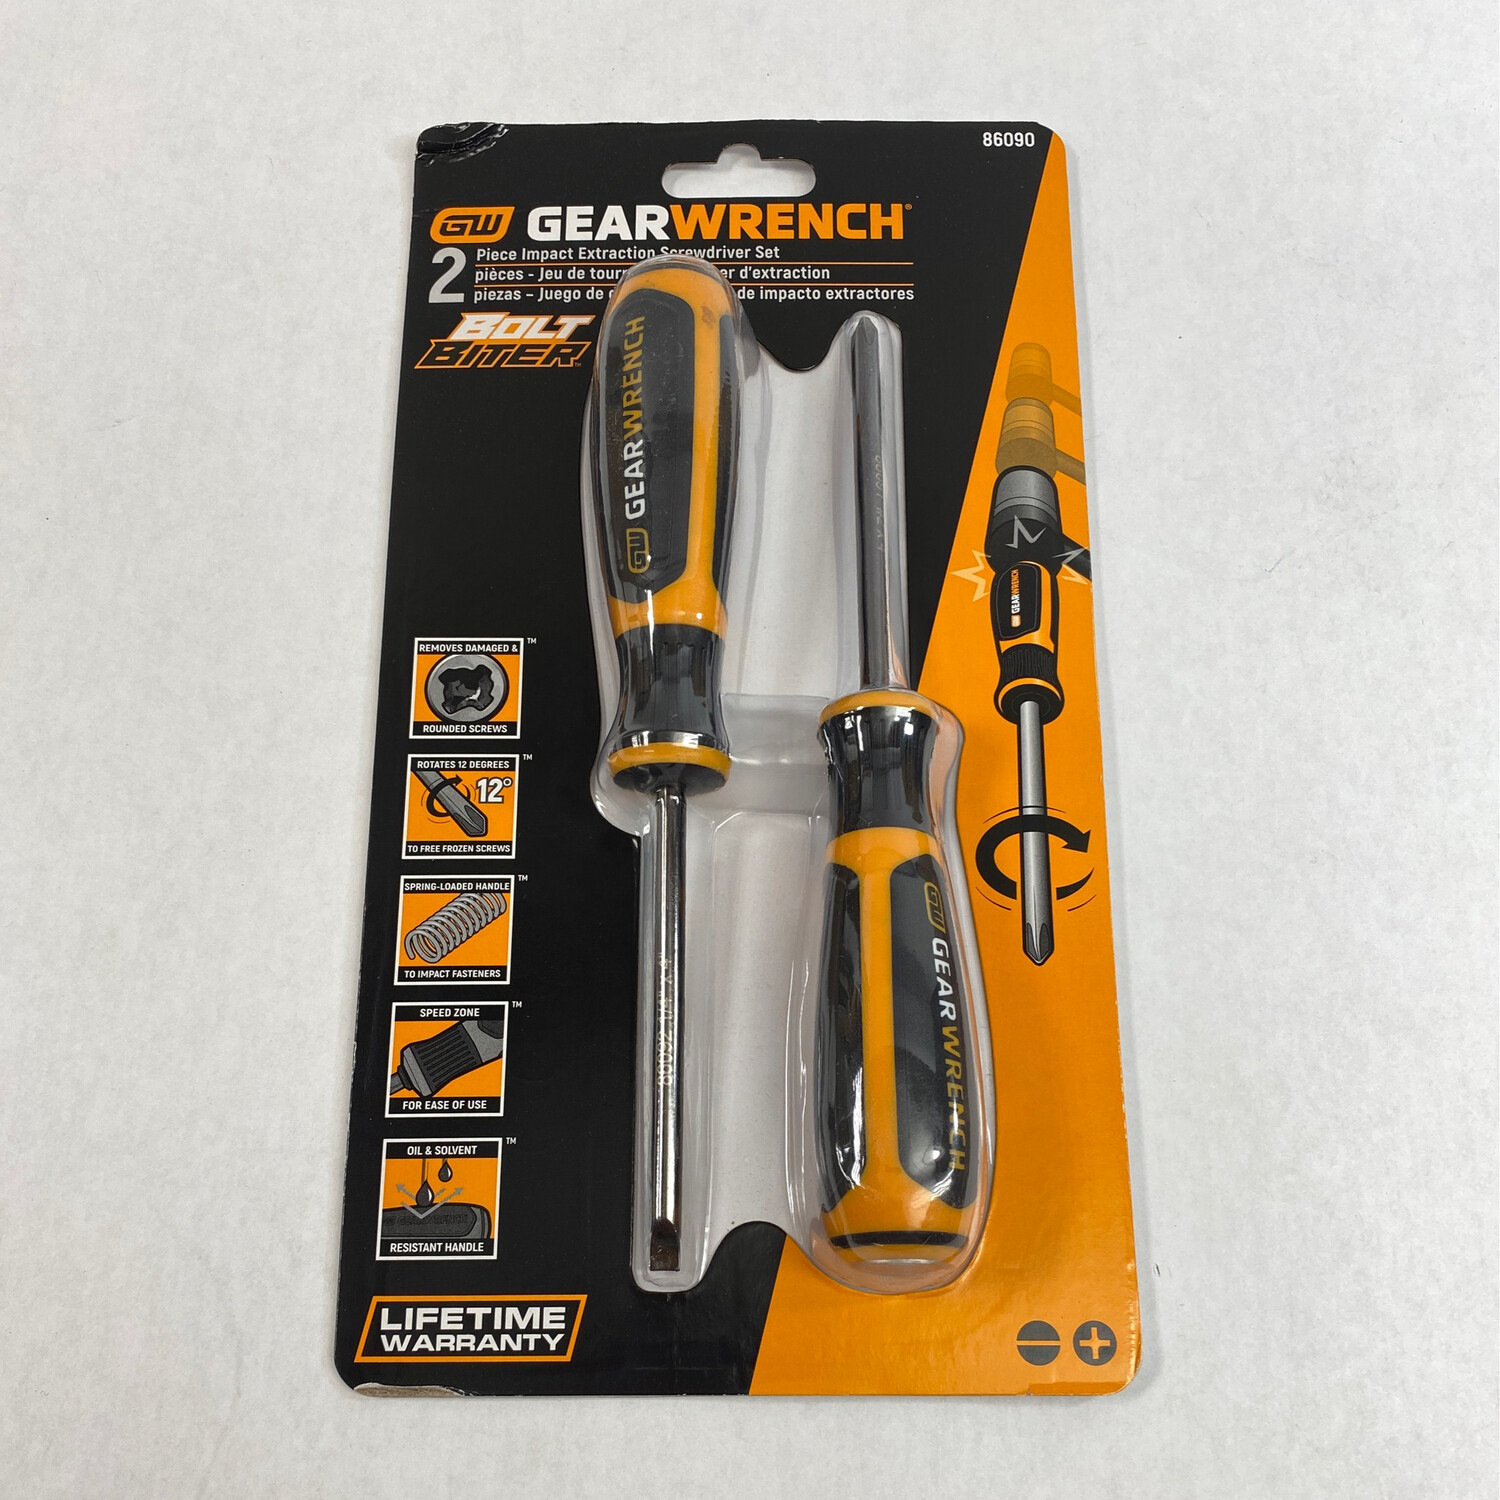 Gearwrench 2 Pc Impact Extraction Screwdriver Set, 86090